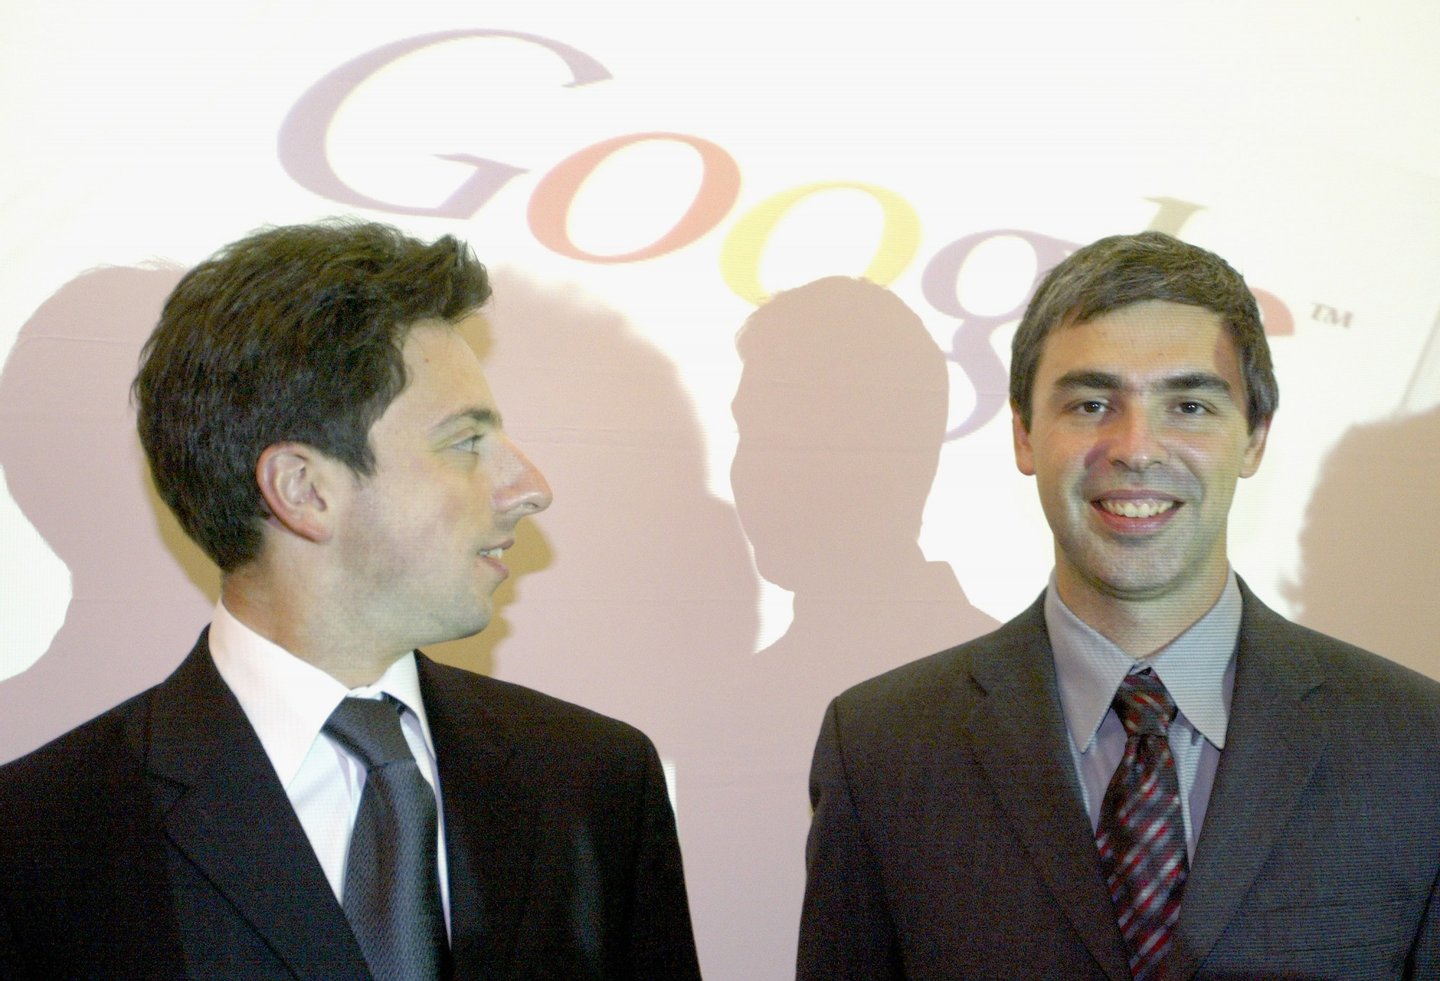 FRANKFURT, GERMANY - OCTOBER 7: Google founders Sergey Brin (L) and Larry Page (R) joke prior to a news conference during the opening of the Frankfurt bookfair on October 7, 2004 in Frankfurt, Germany. The Frankfurt Bookfair is the world's largest event of it's type and this year's focal theme "Literature of Arabia" will run until October 10, 2004. (Photo by Ralph Orlowski/Getty Images)